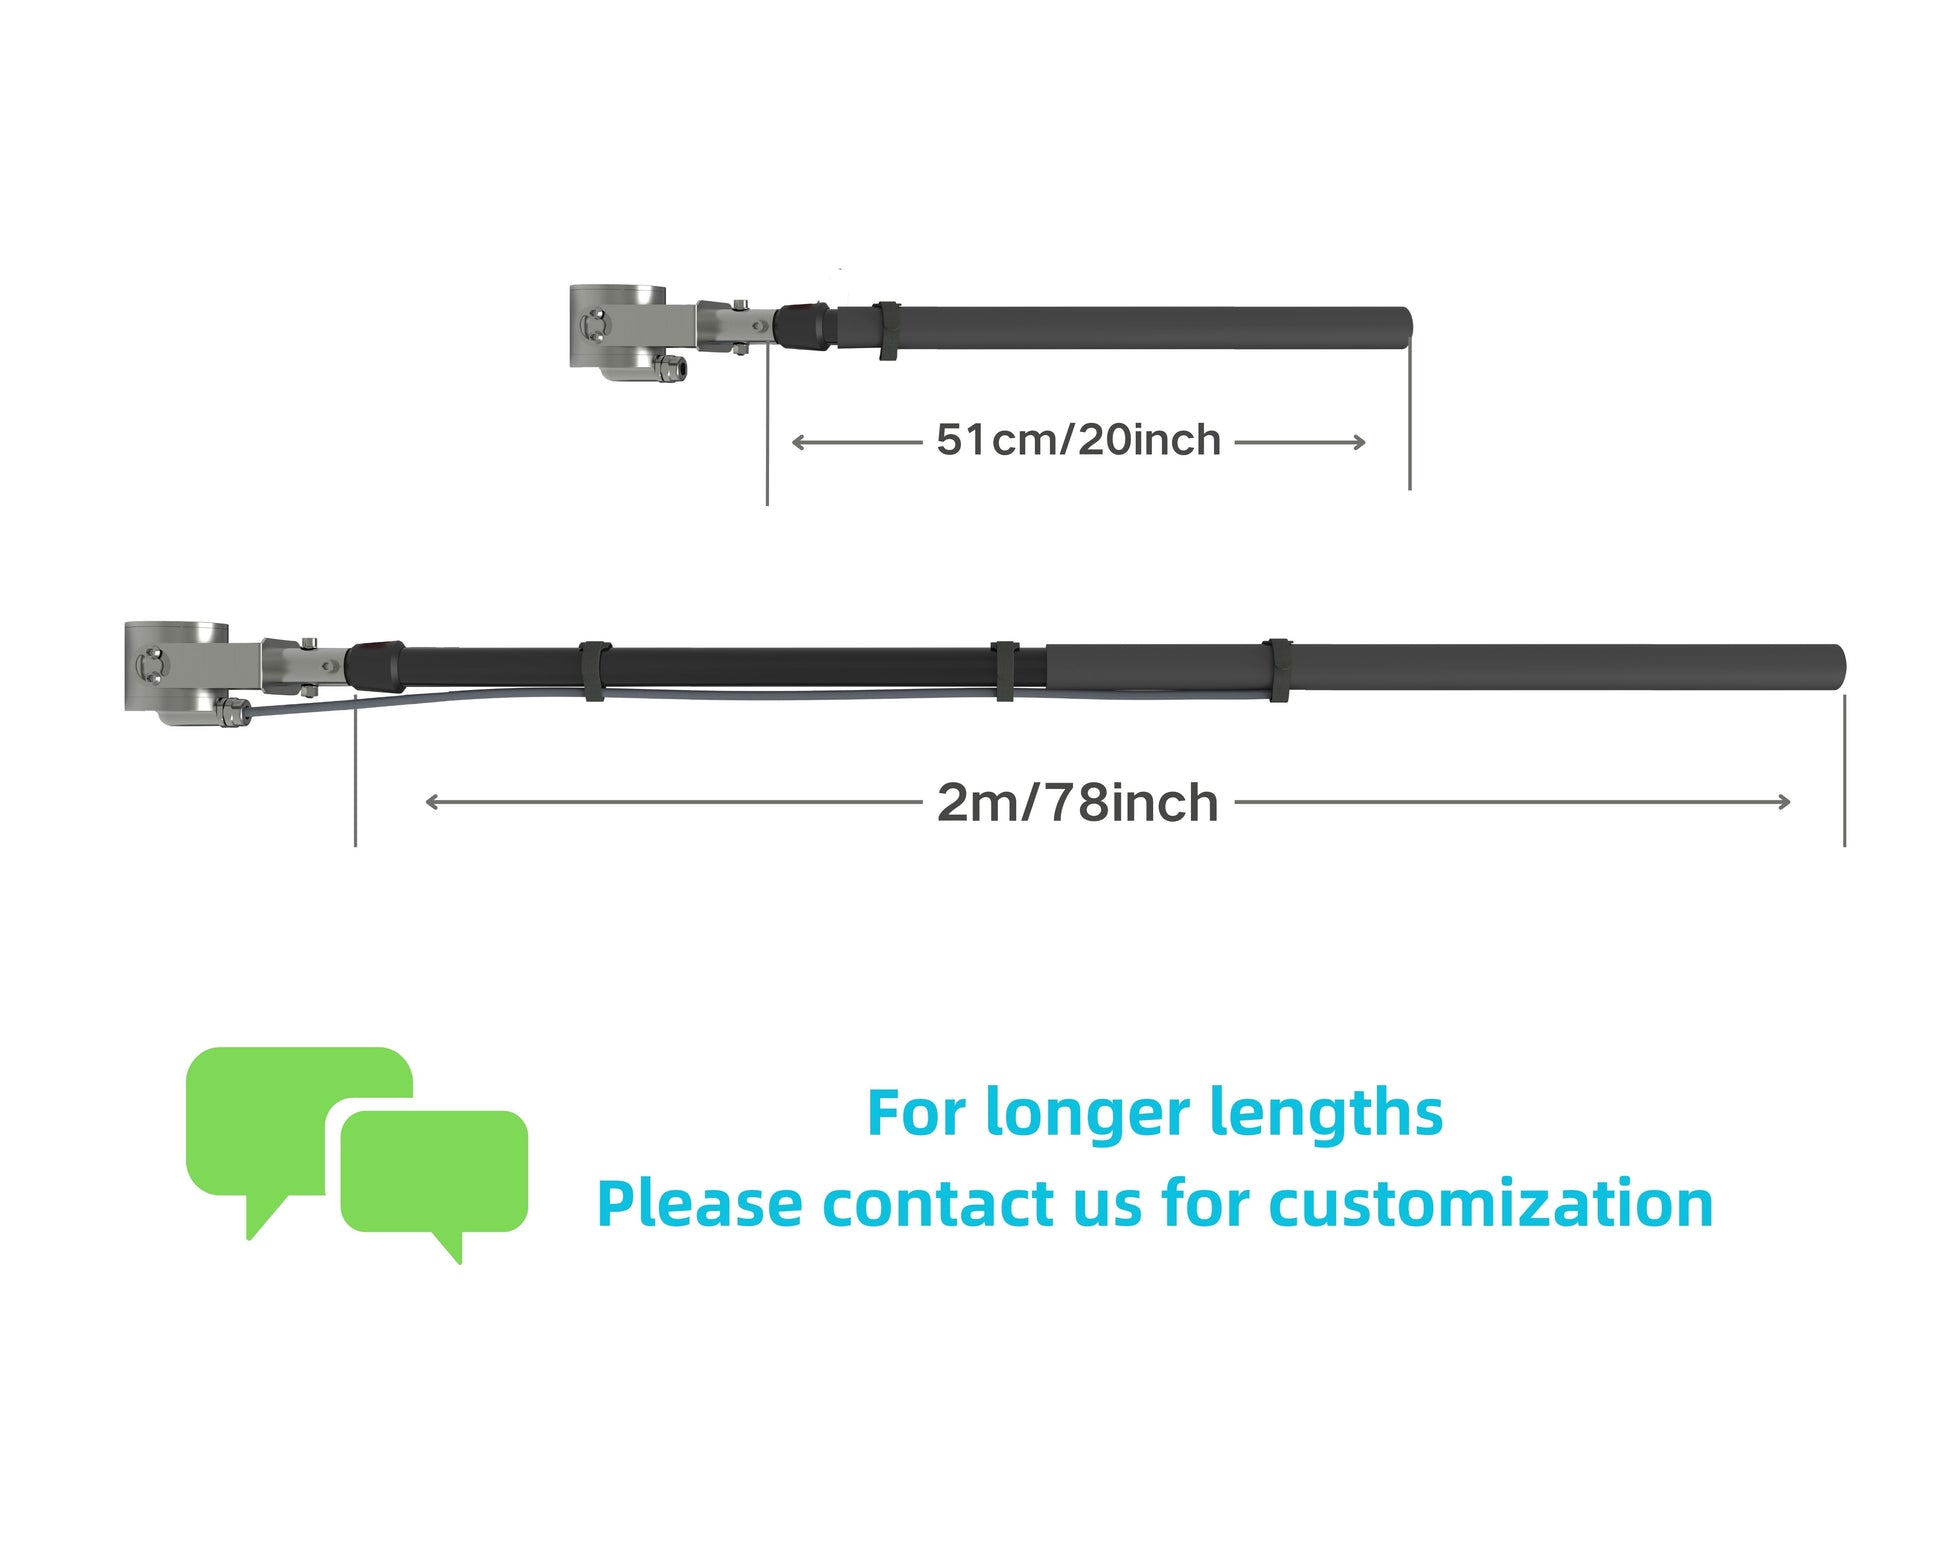 Telescopic pole used with the camera is easy to install and pick up – Barlus